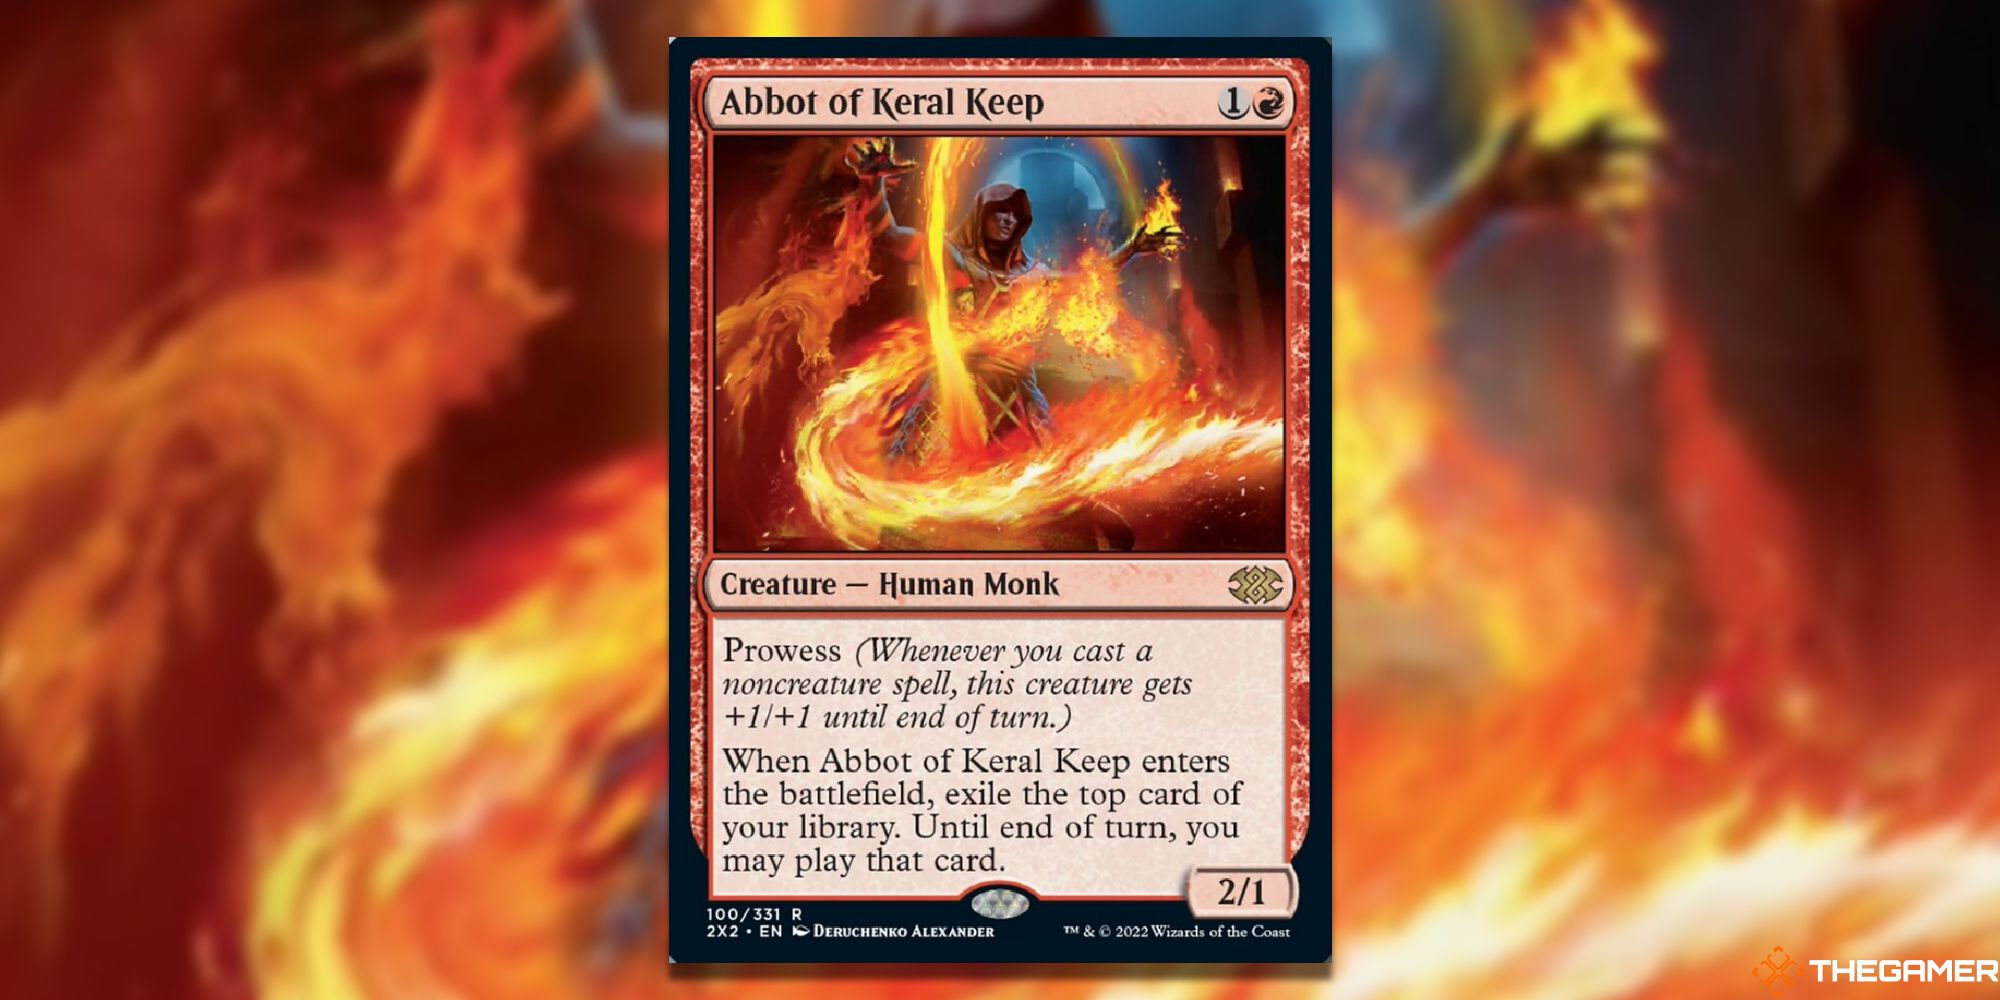 Magic: The Gathering Abbot of Keral Keep full card with background